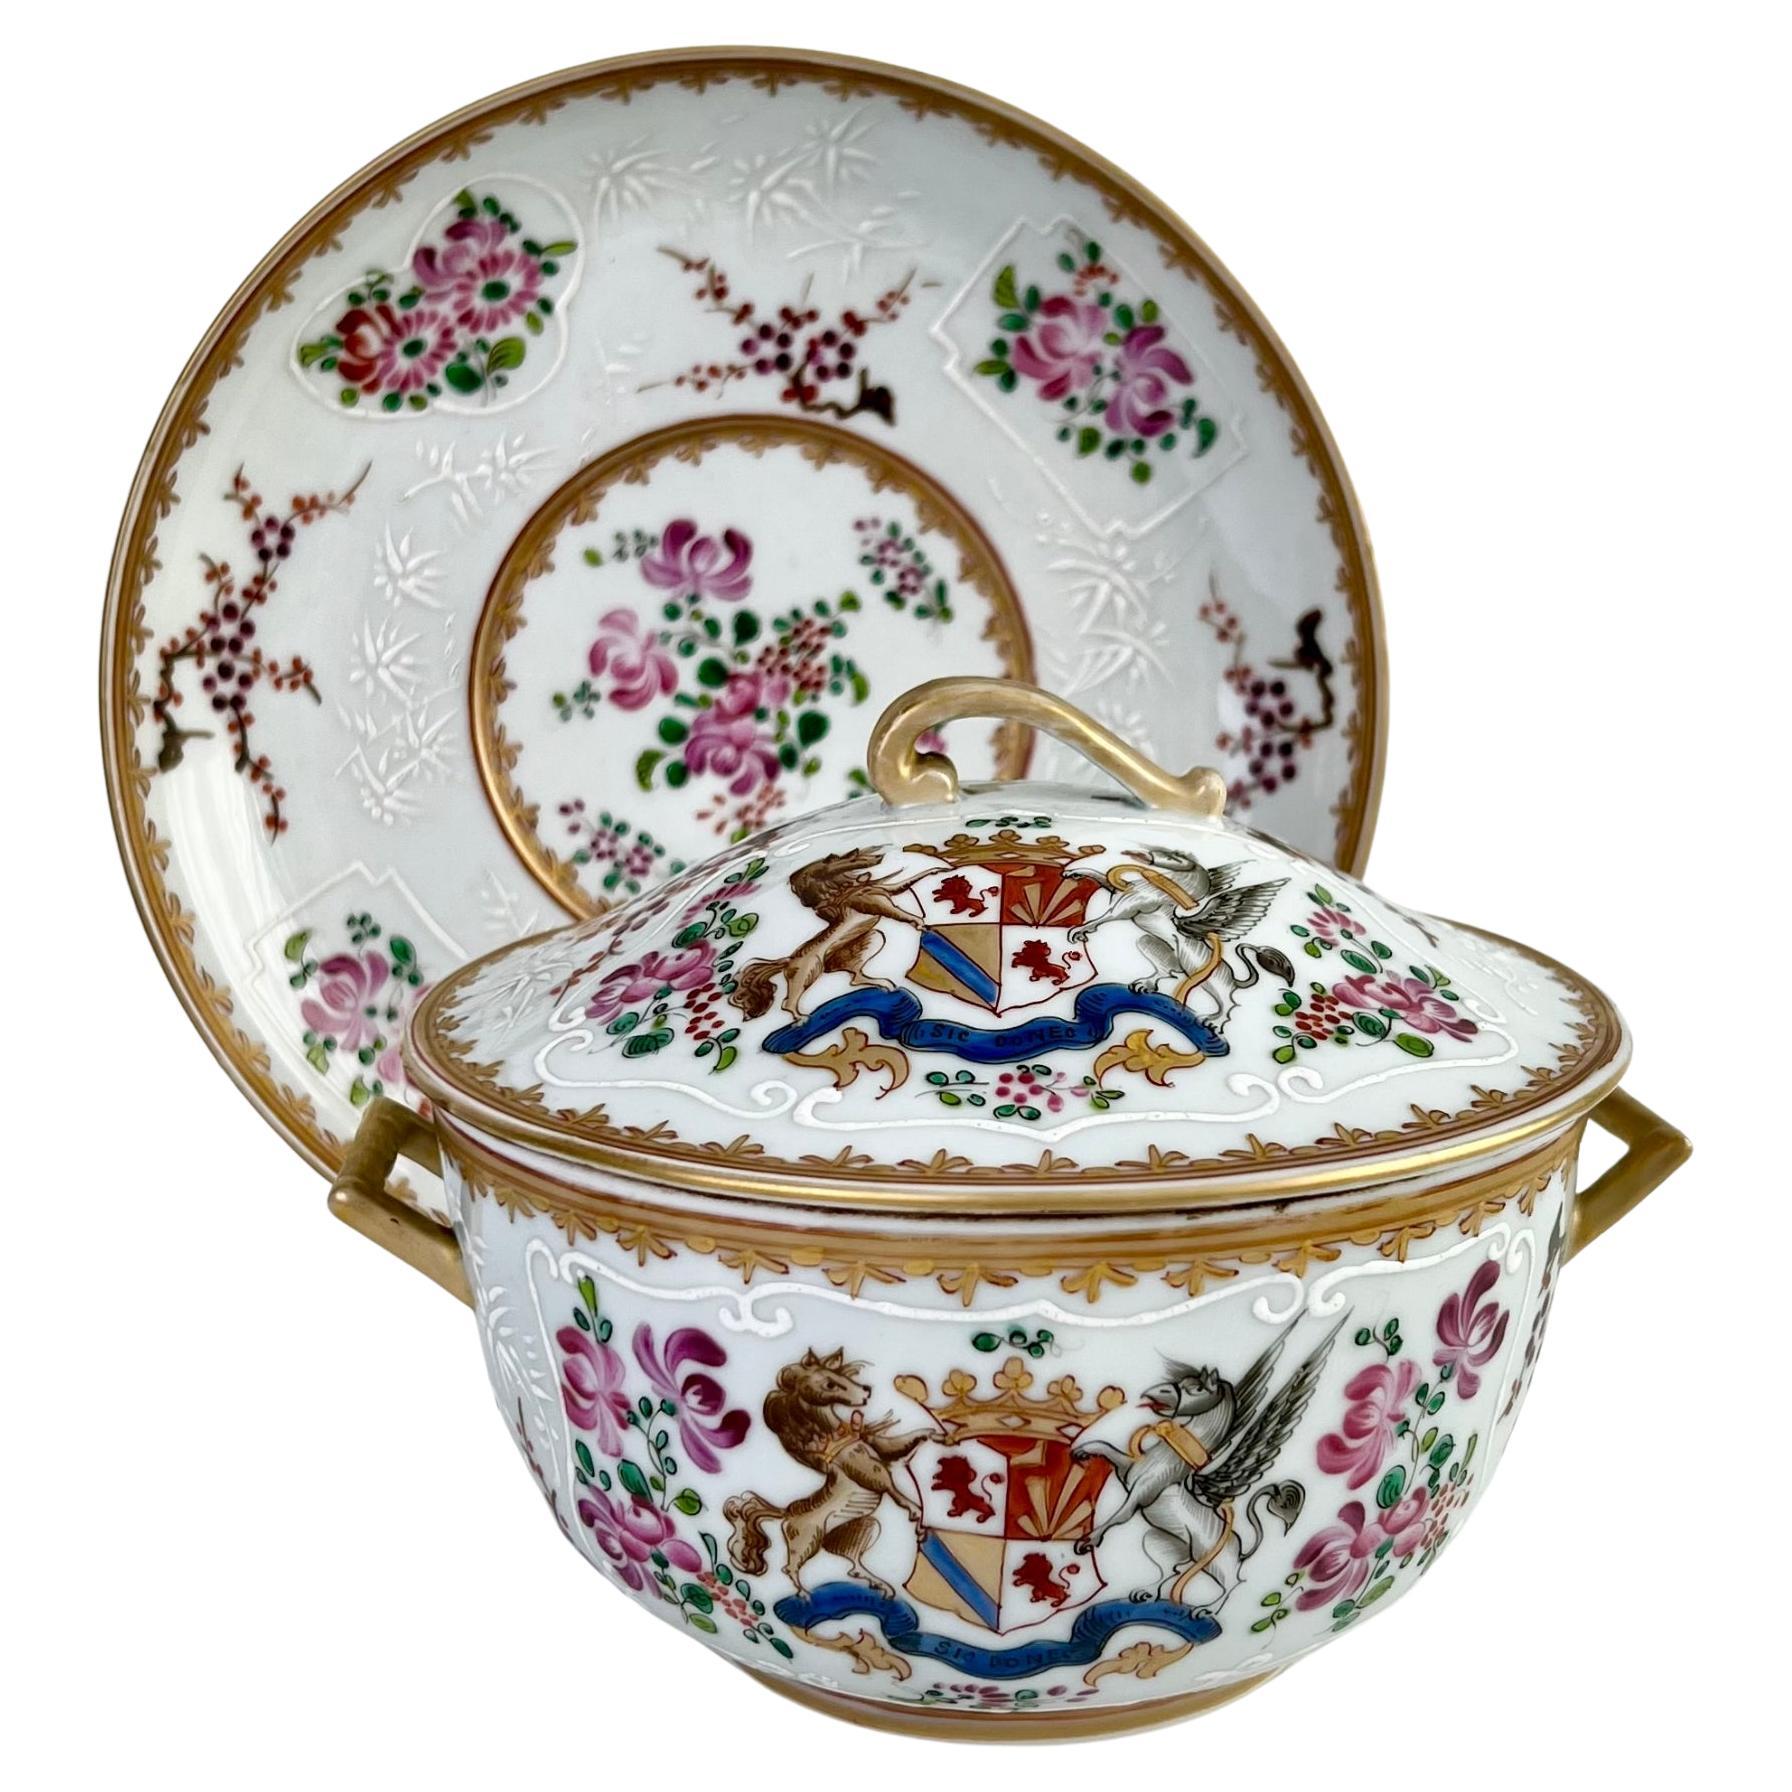 Edmé Samson Armorial Sauce Tureen, Chinese Export "Sic Donec", 1845-1891 For Sale